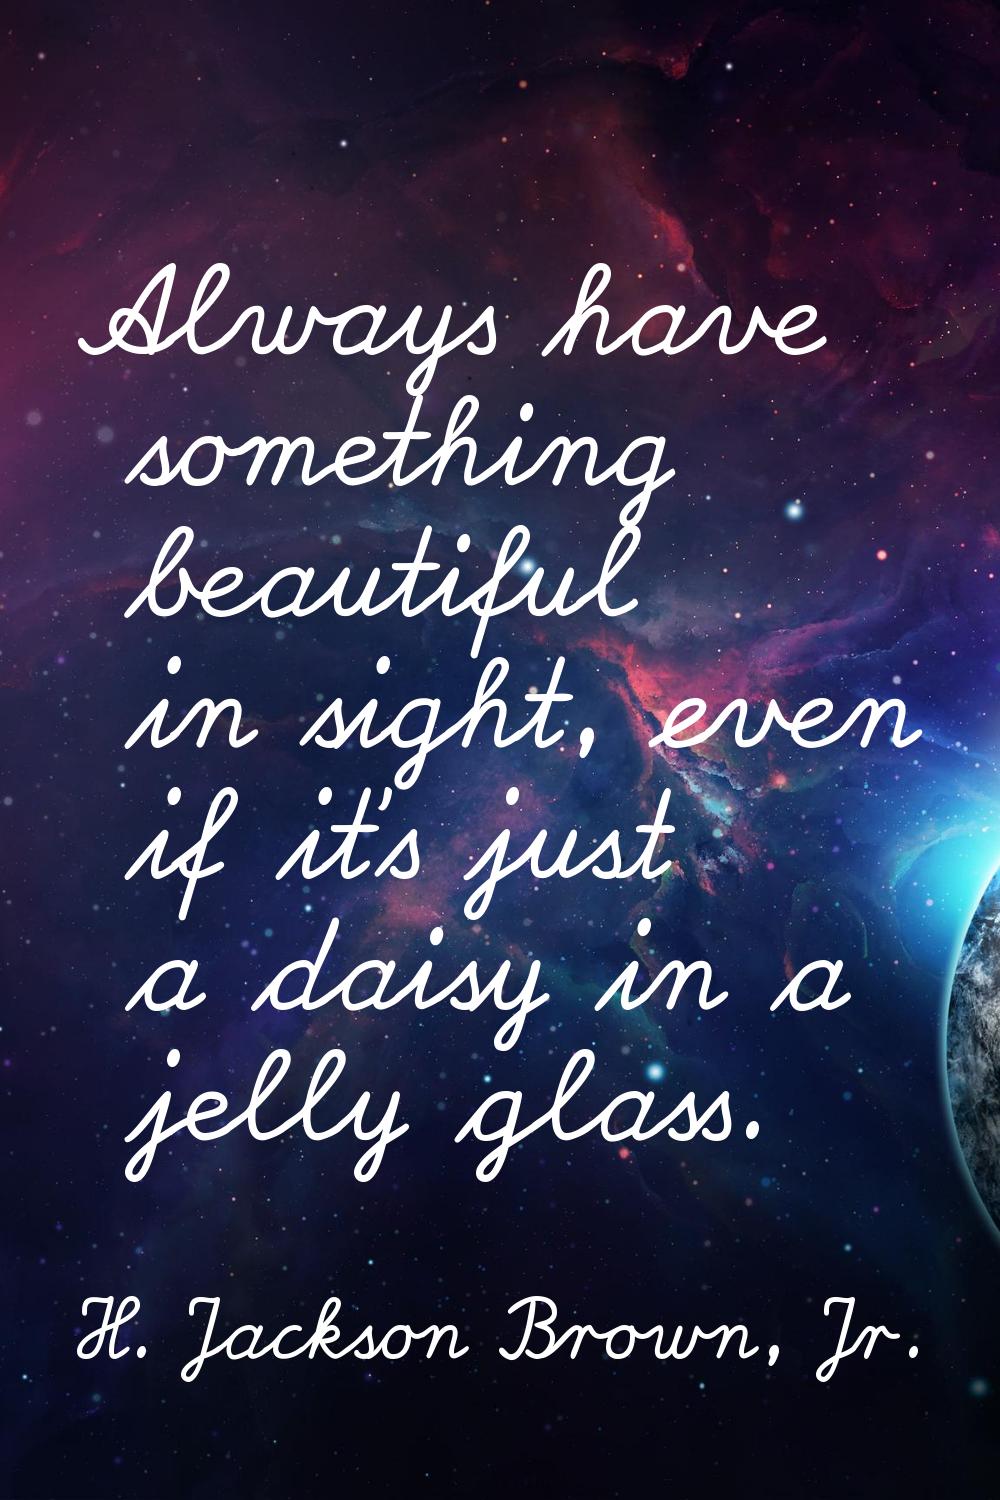 Always have something beautiful in sight, even if it's just a daisy in a jelly glass.